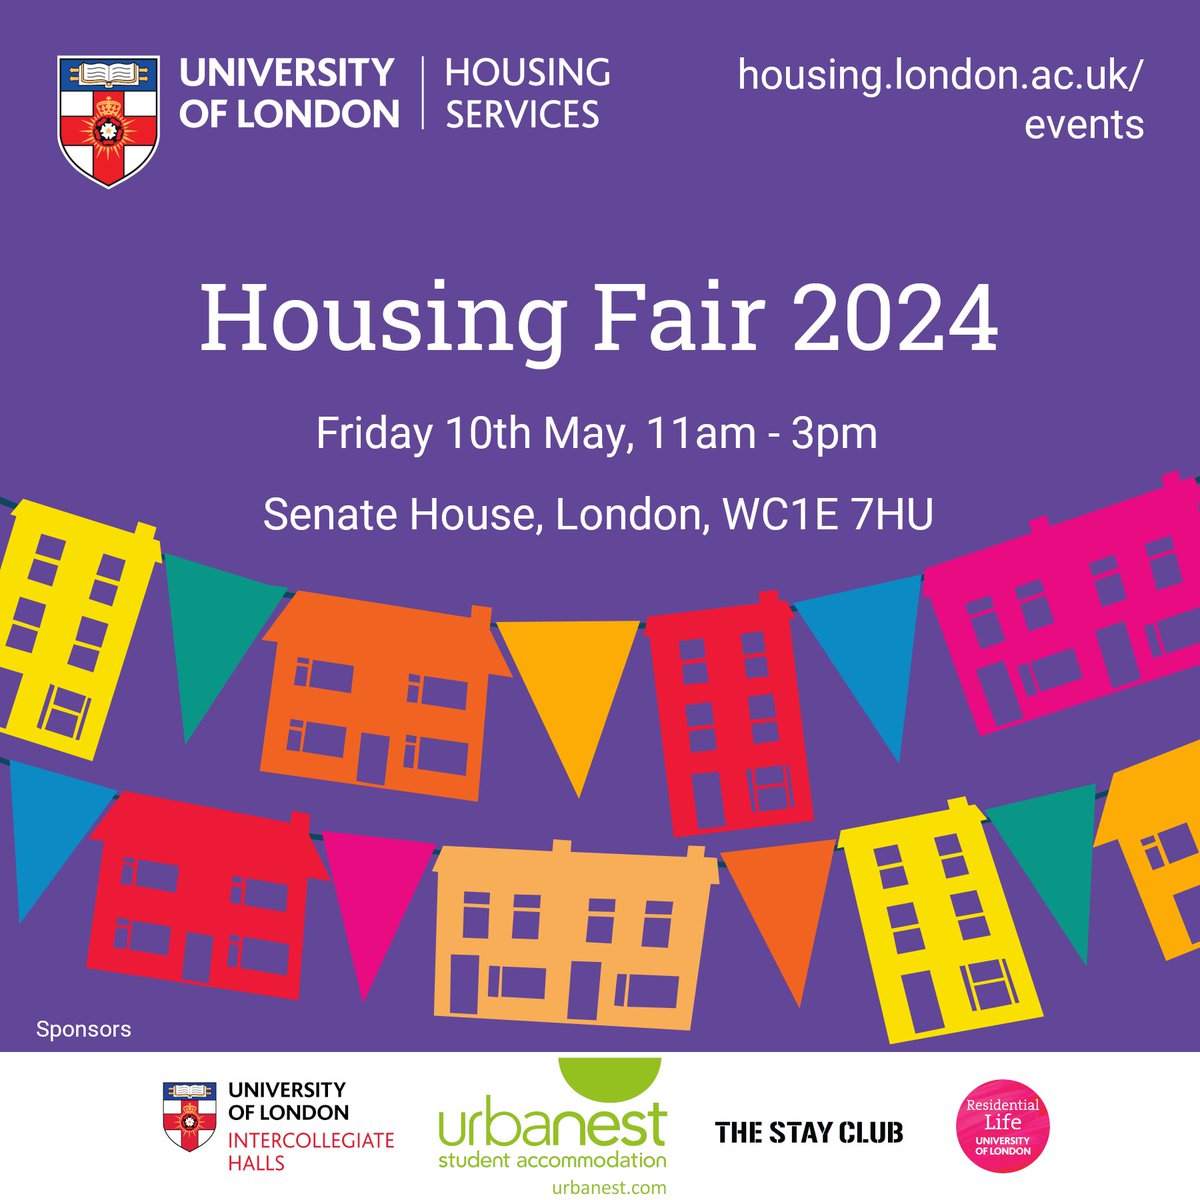 The annual Housing Fair is next week! If you're looking for accommodation for next year, don't miss your opportunity to speak to a range of housing providers to find your perfect home. Free entry with fun, games and freebies! Visit our website for more information.